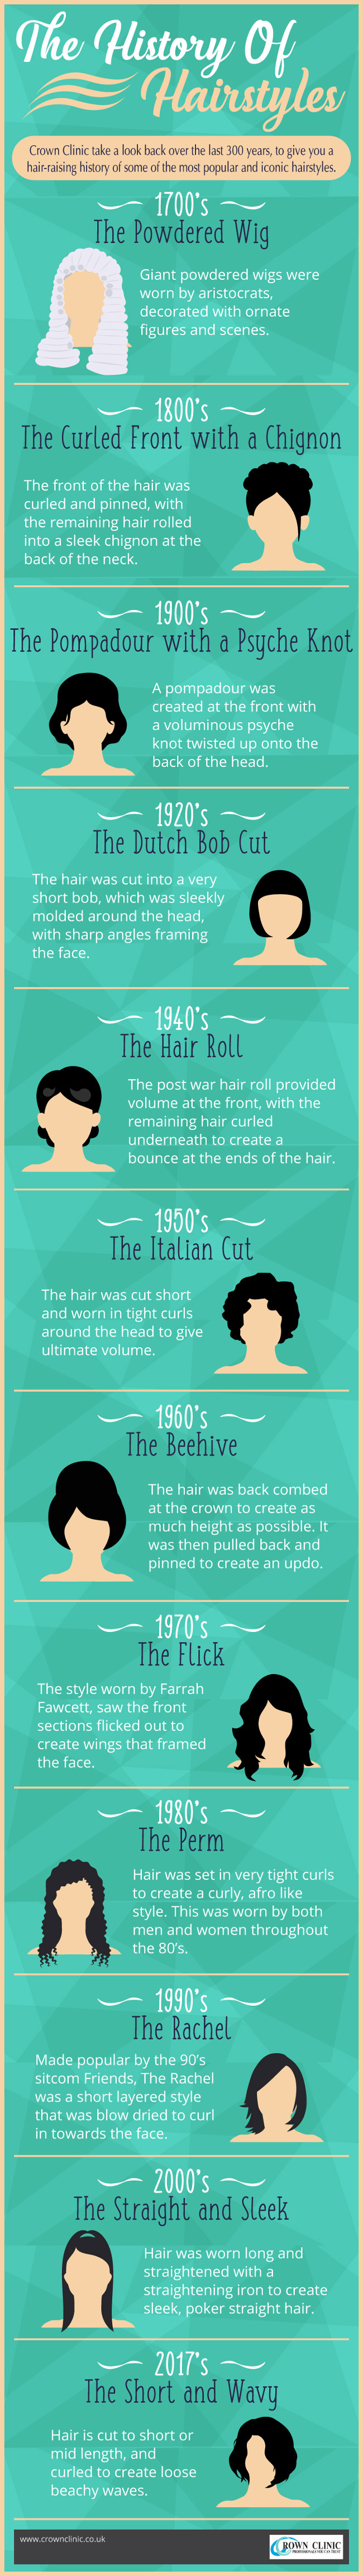 history of hair styles